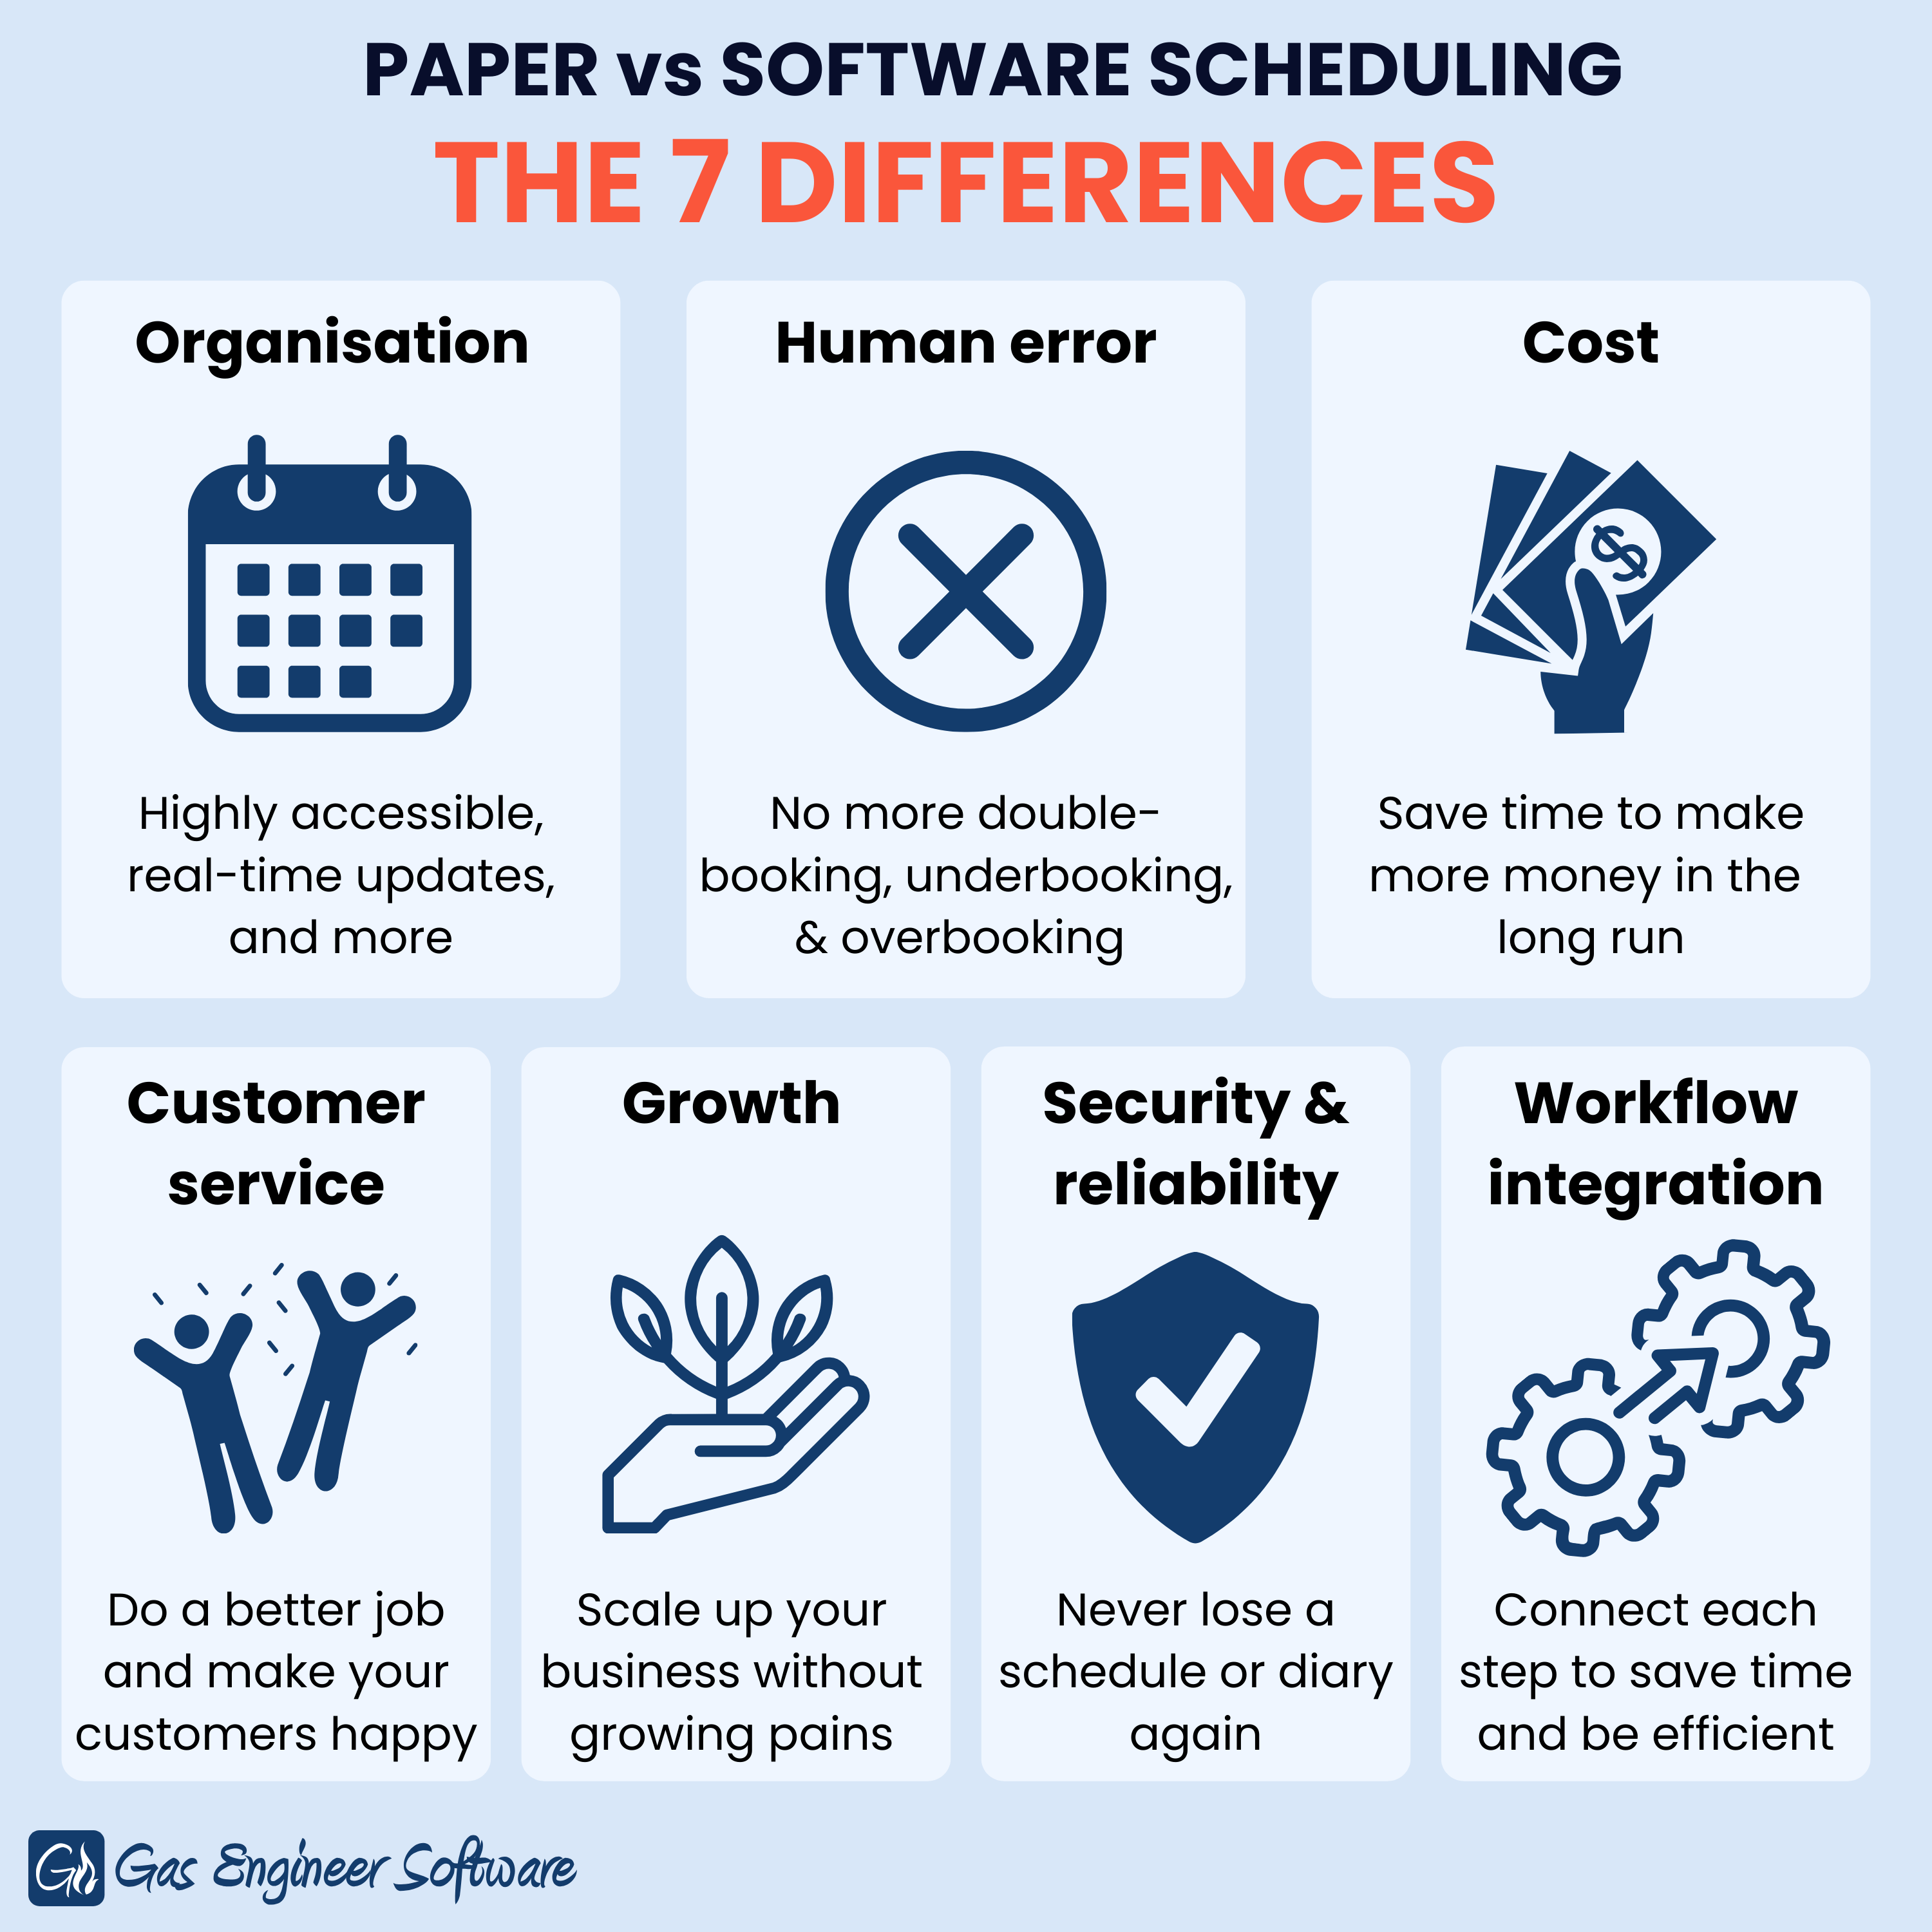 The 7 benefits of software for scheduling